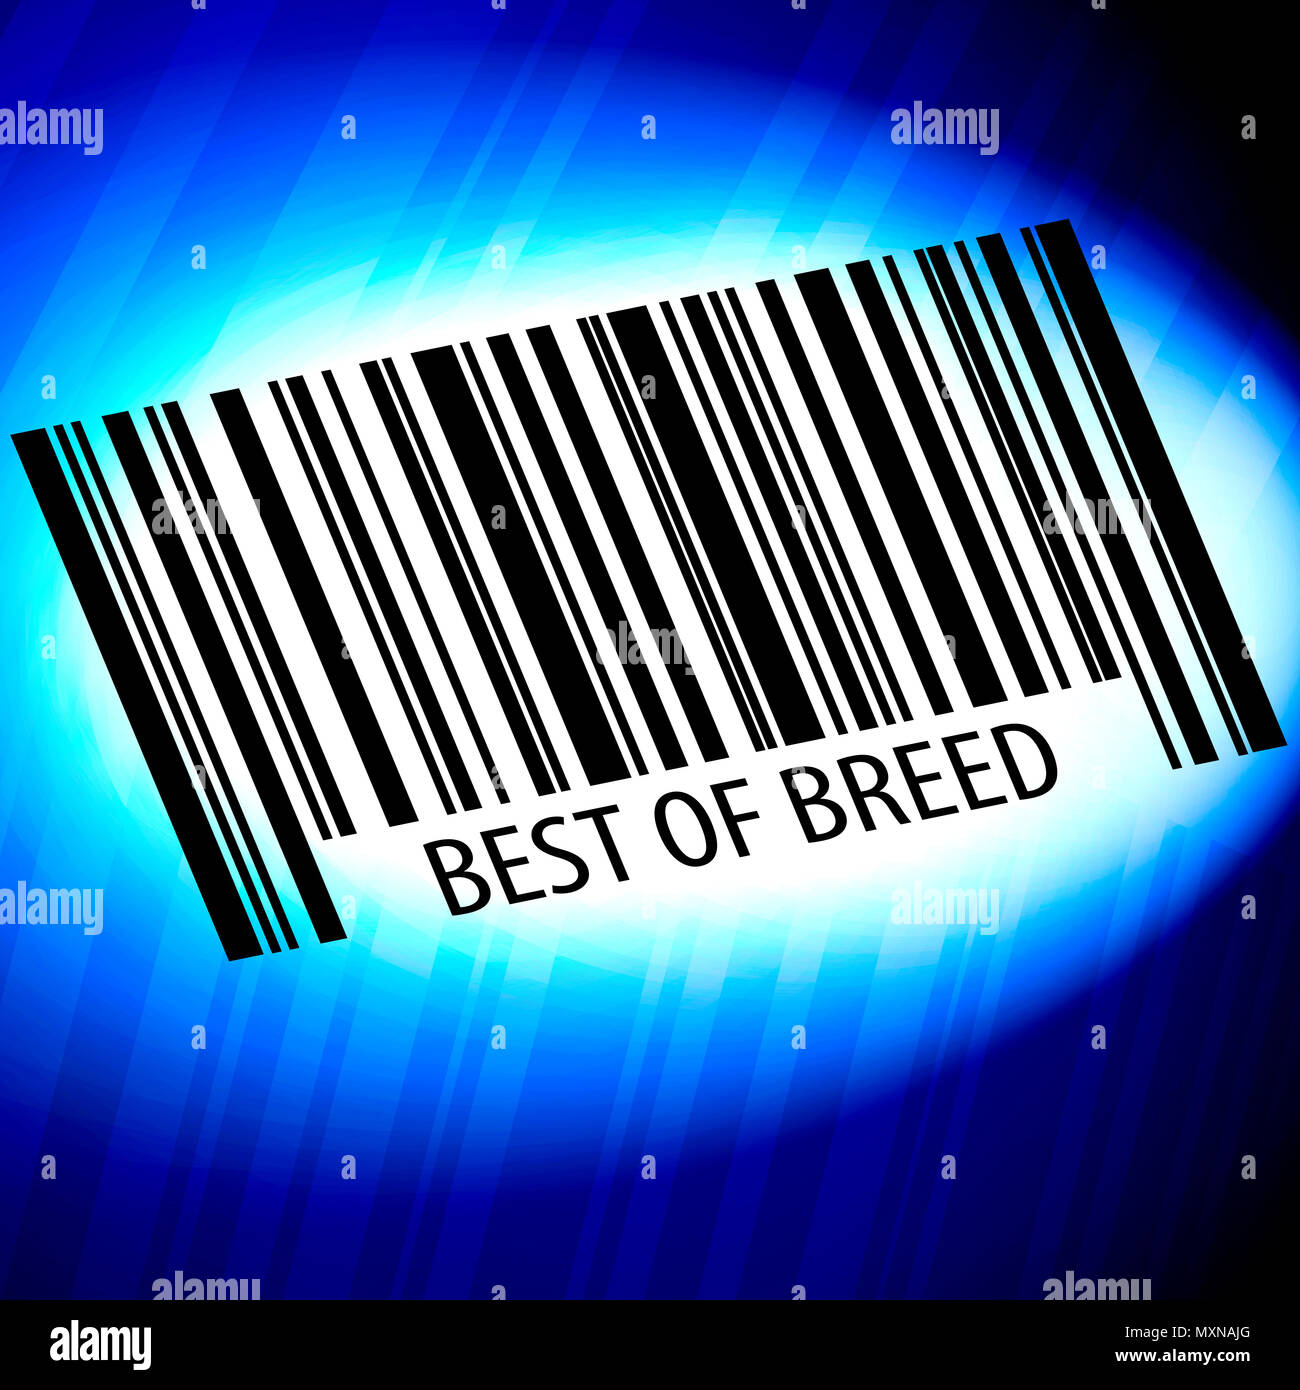 Best of Breed - barcode with blue Background Stock Photo